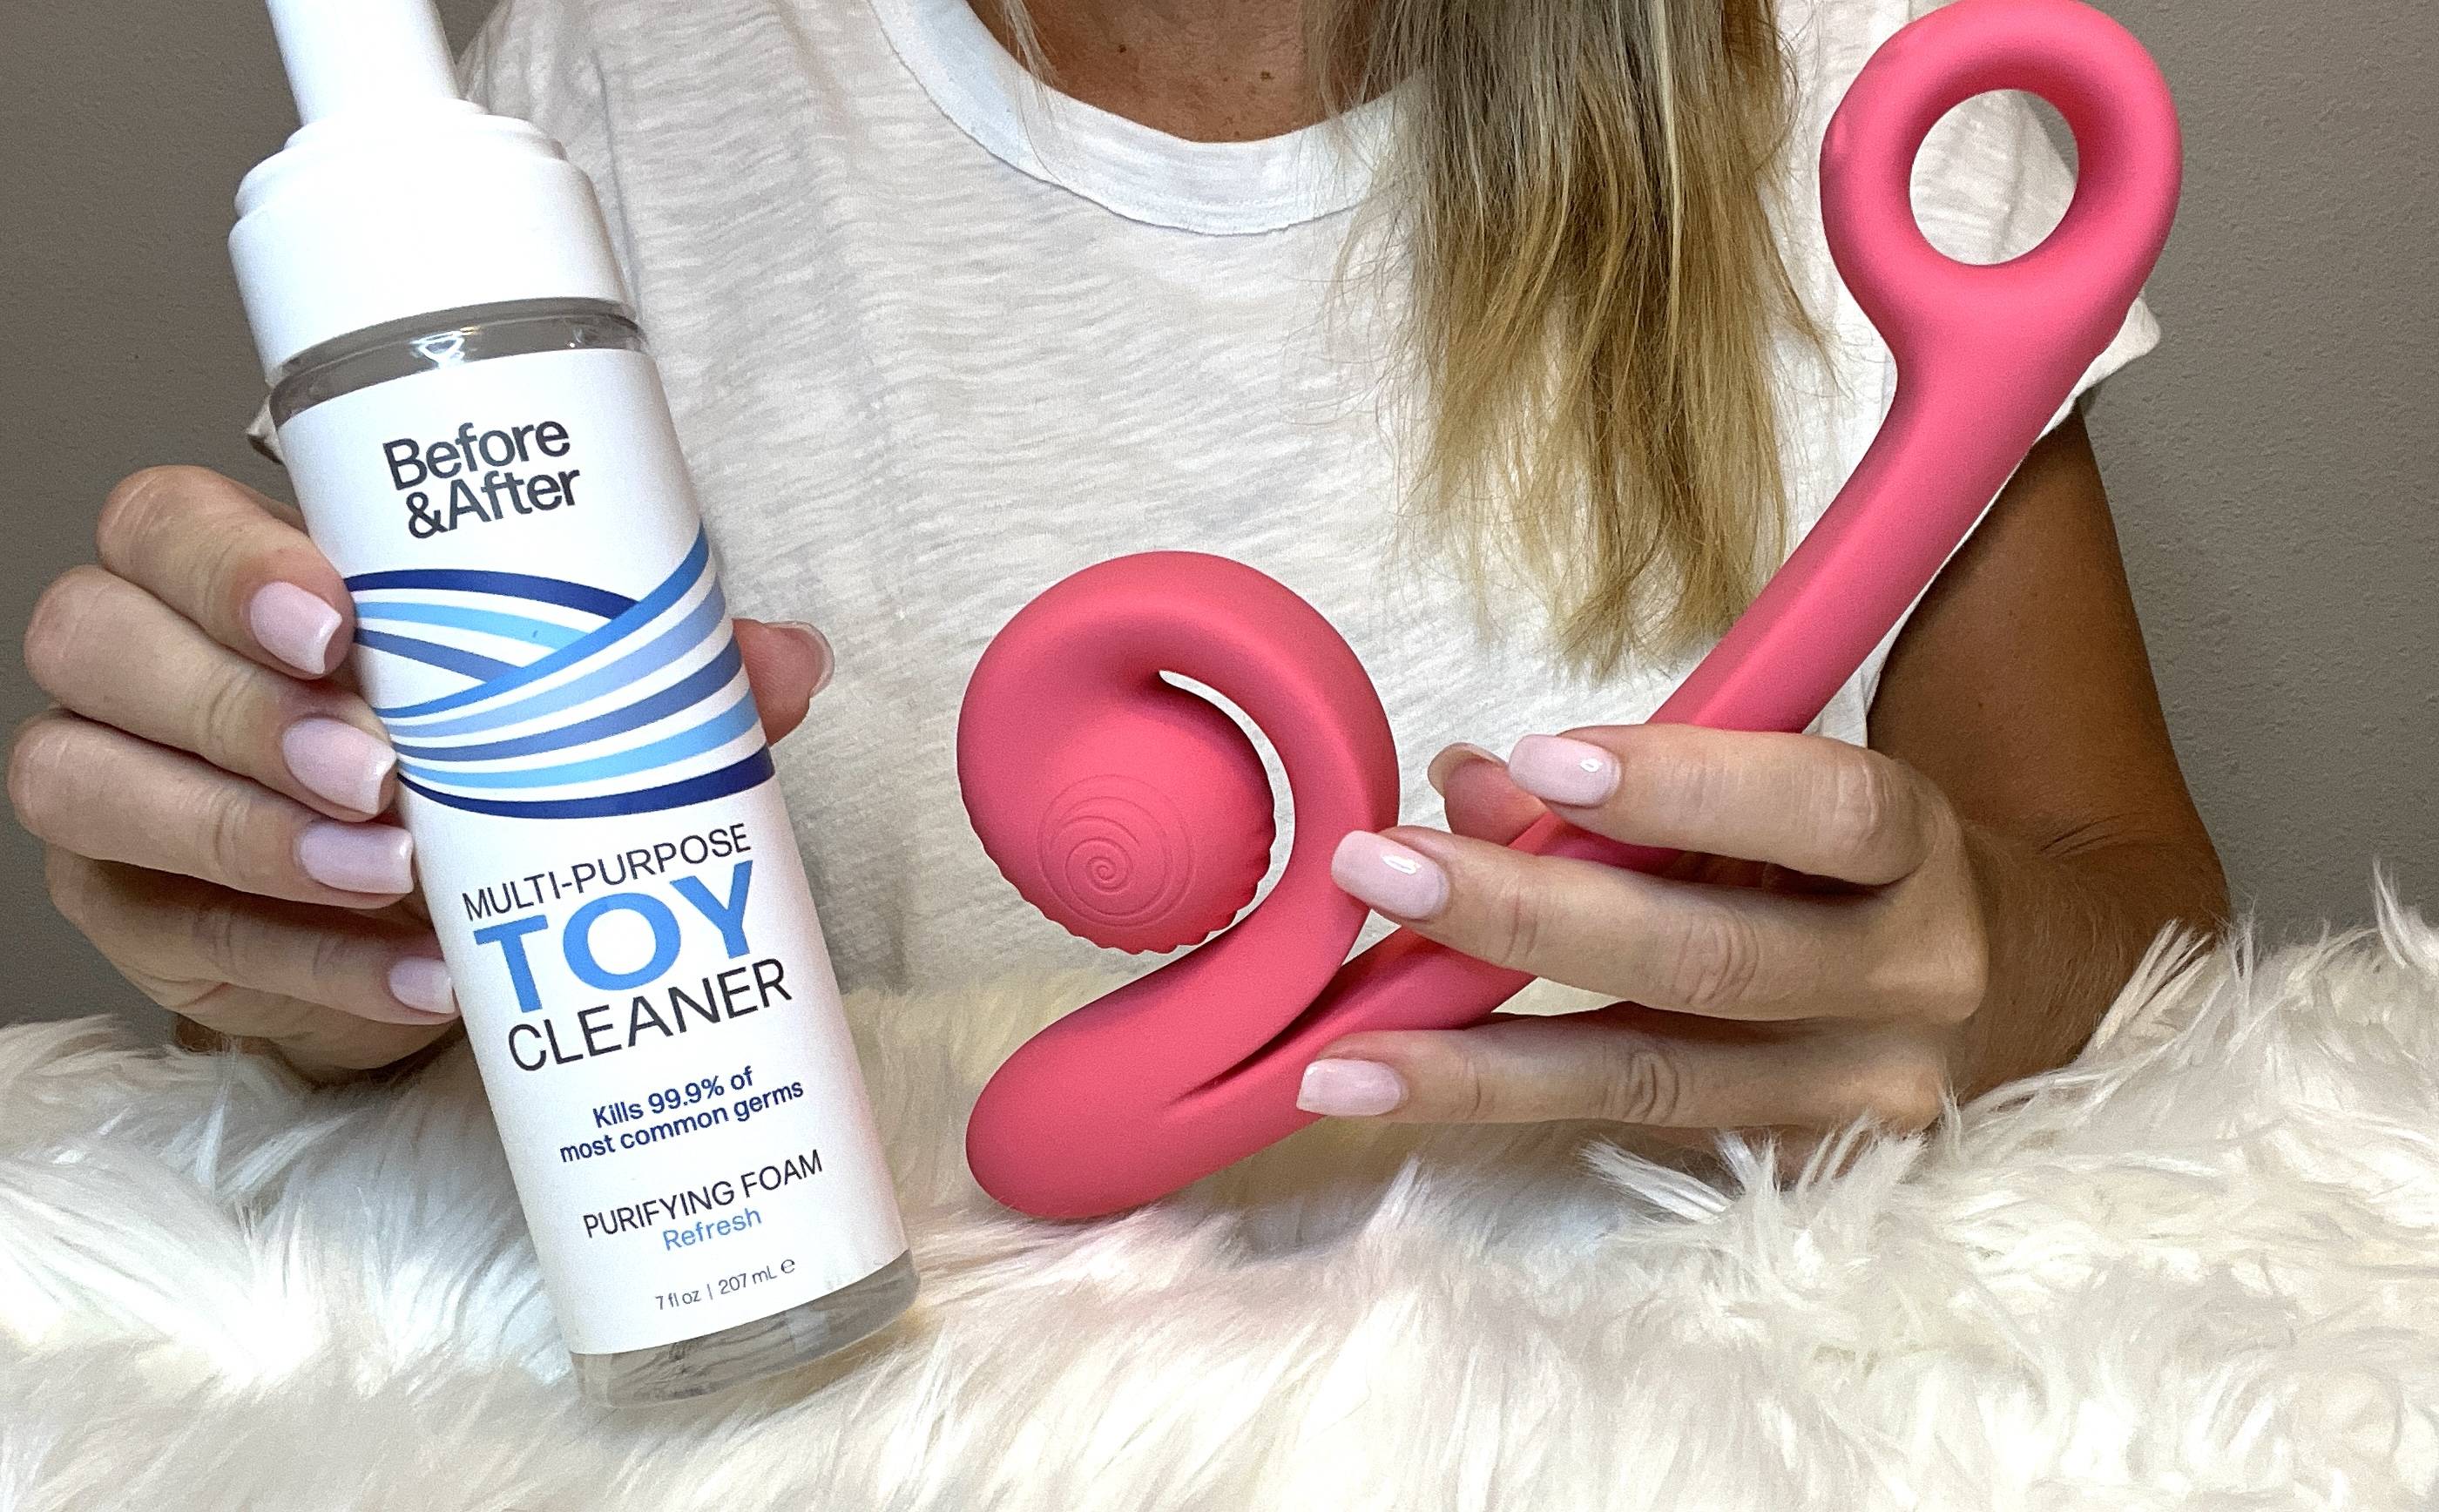 Womanizer Duo 2 with Before & After Toy Cleaner